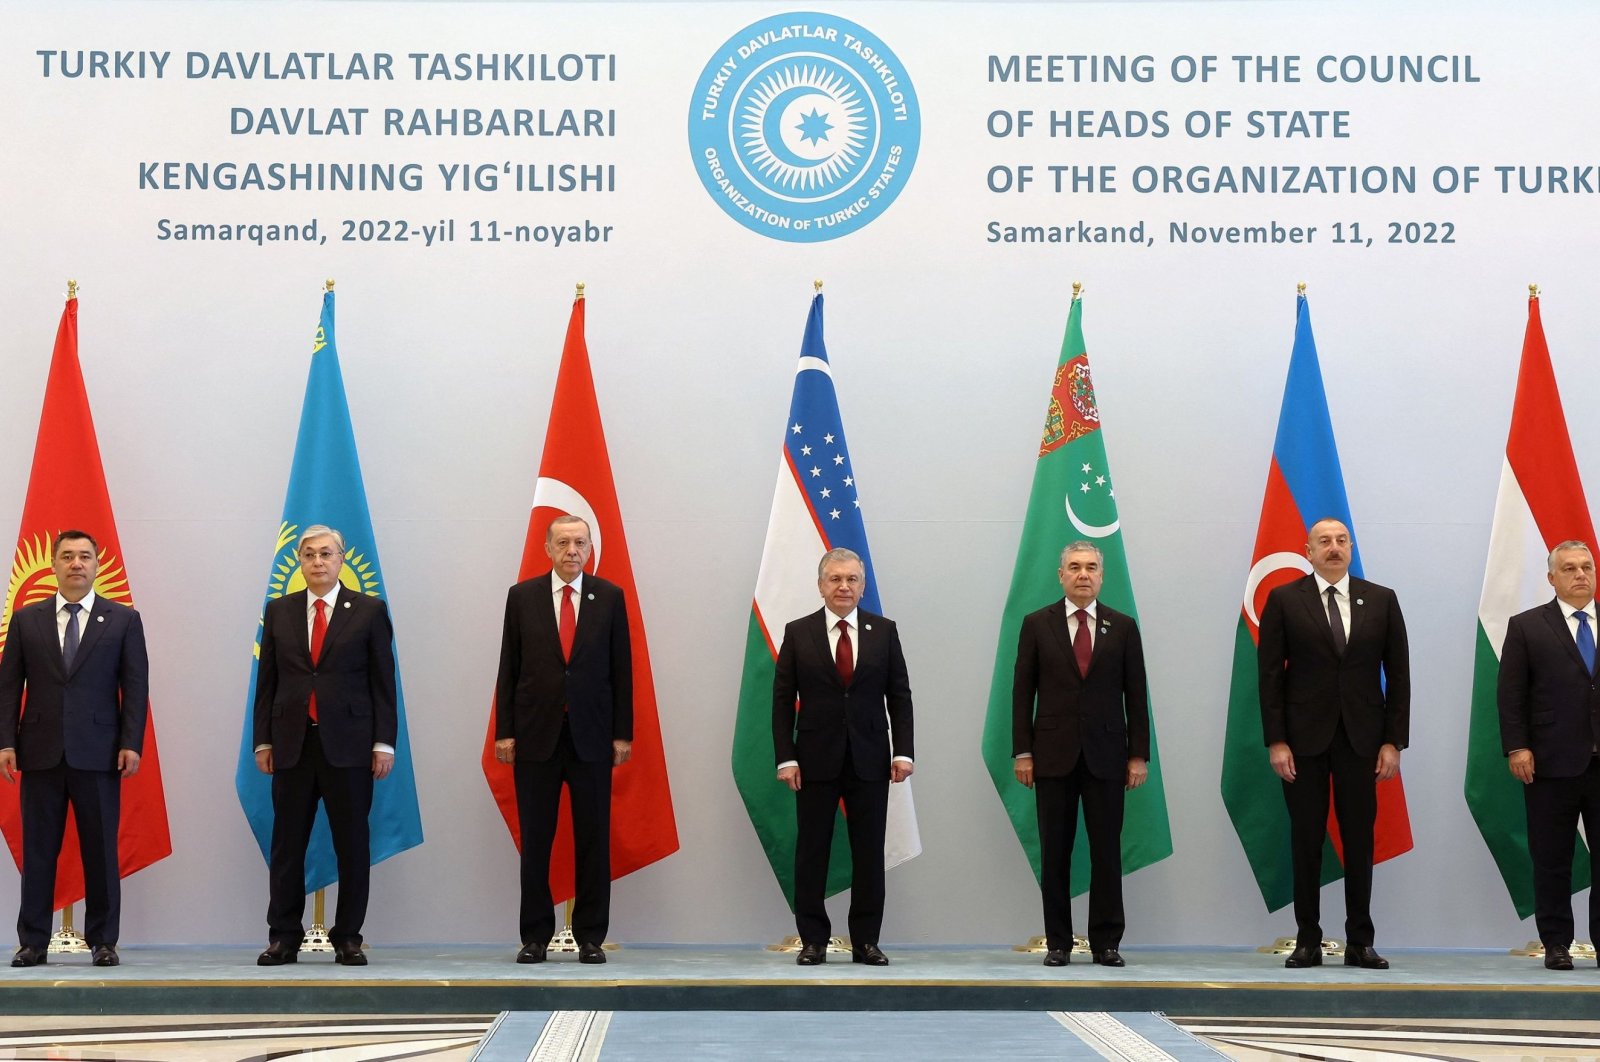 Heads of state stand during the 9th Summit of the Organization of Turkic States (OTS) in Samarkand, Uzbekistan, Nov. 11, 2022. (AFP File Photo)